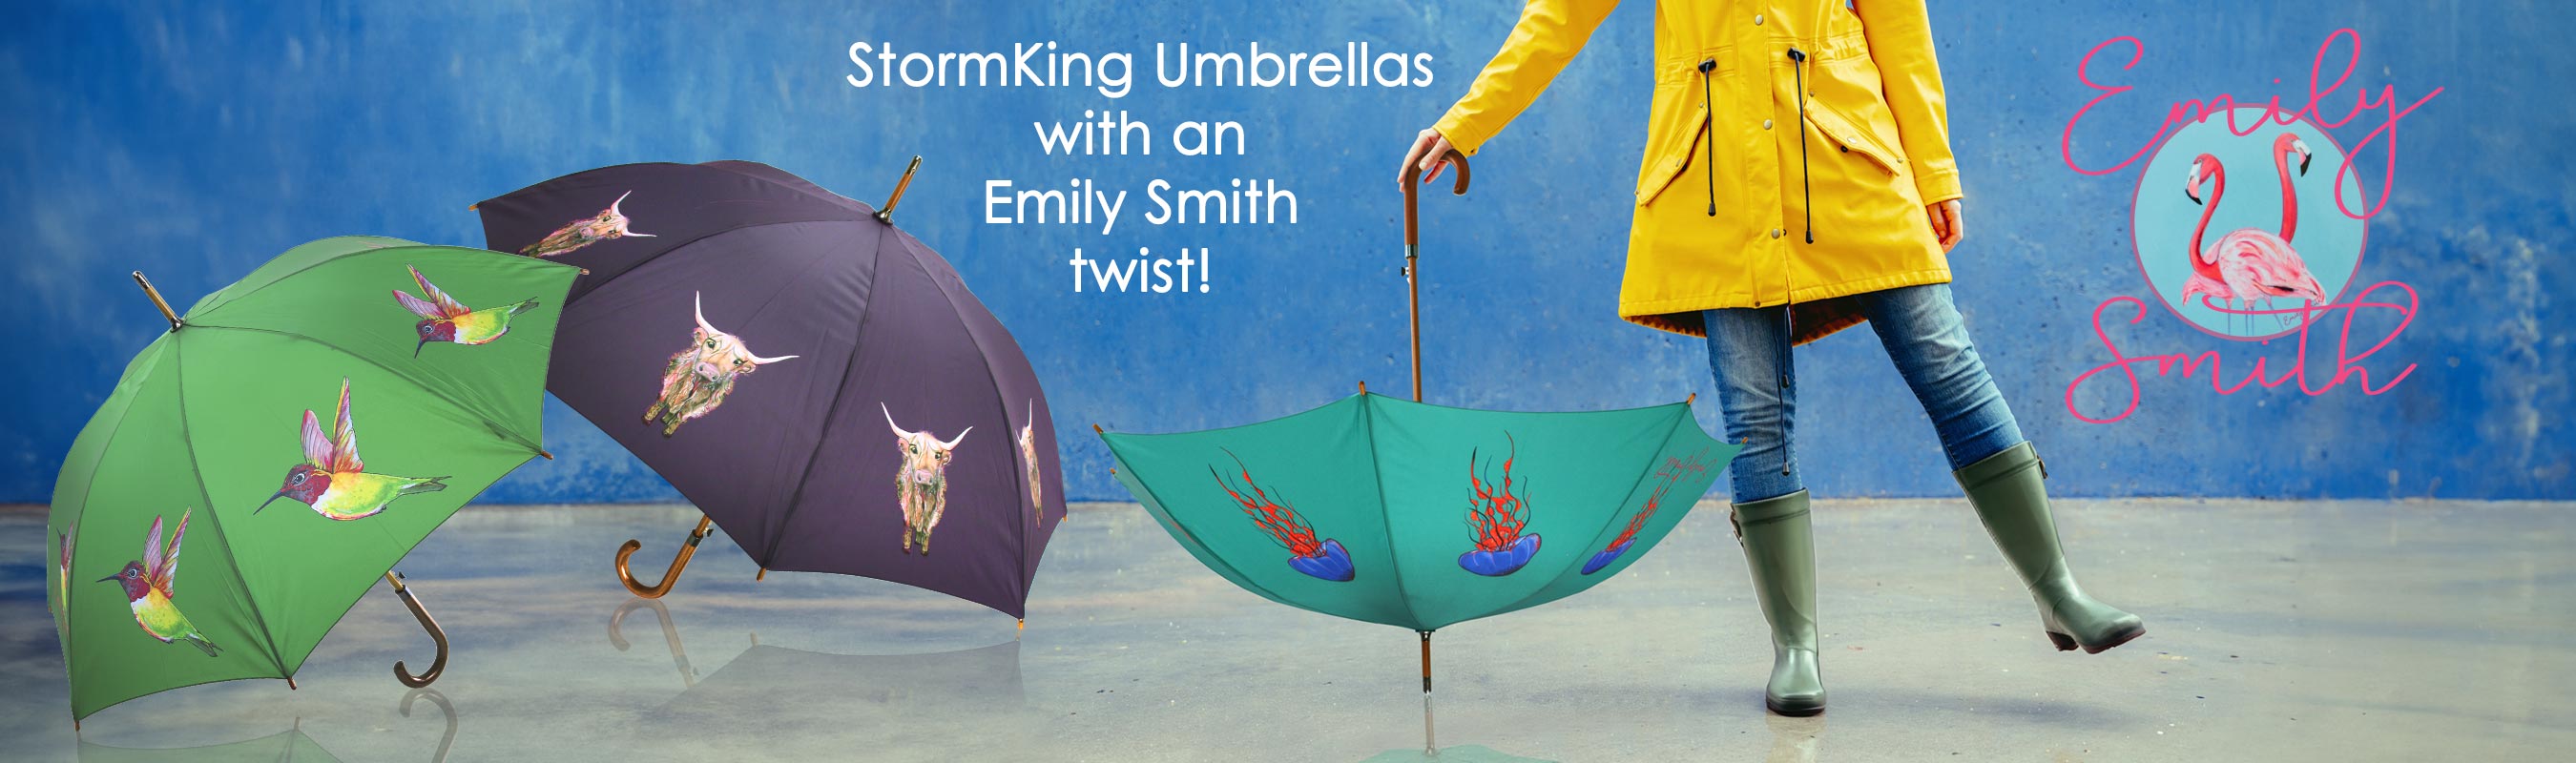 StormKing Umbrellas with an Emily Smith Twist! Check out the Emily Smith Umbrella Collection today!